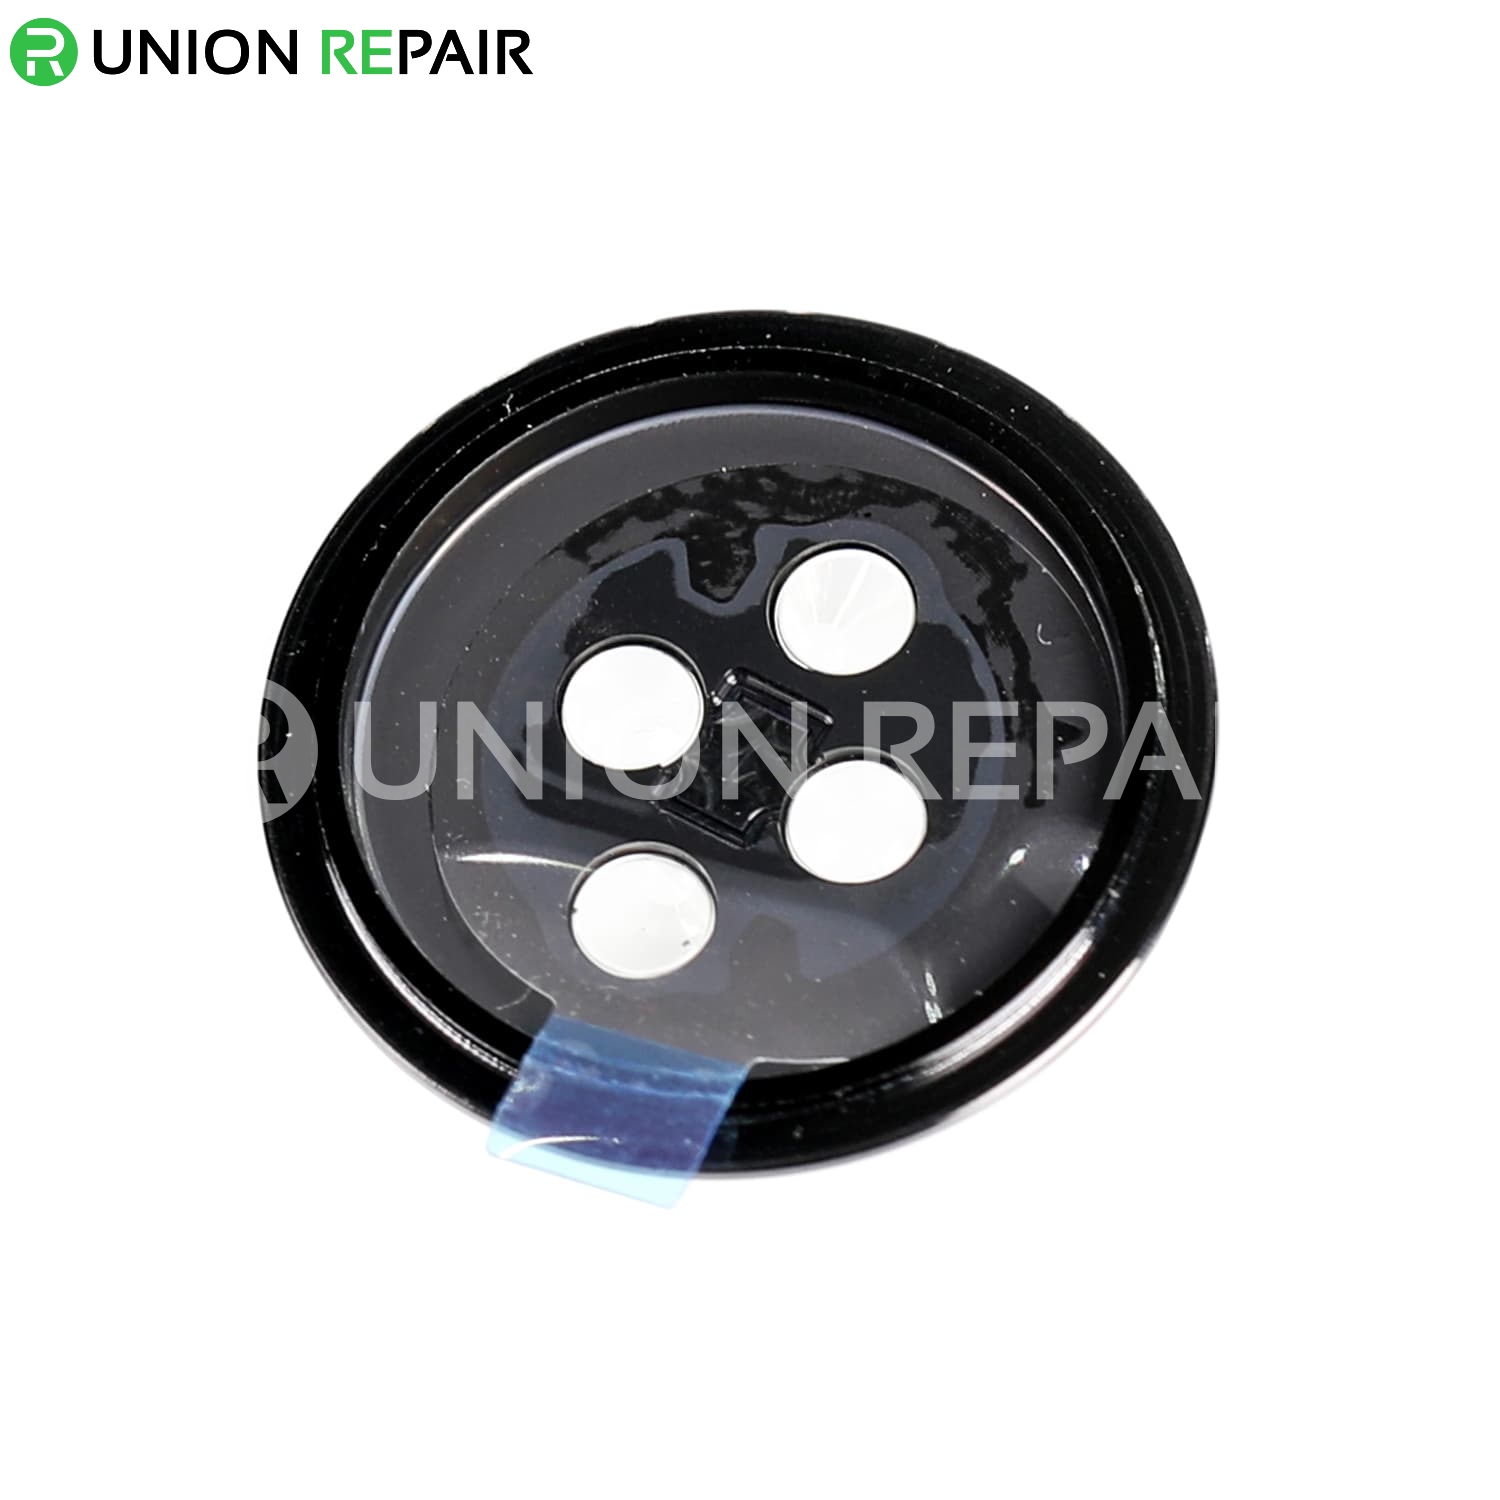 Replacement For Apple Watch S2 38mm Heart Rate Sensor Lens Cover